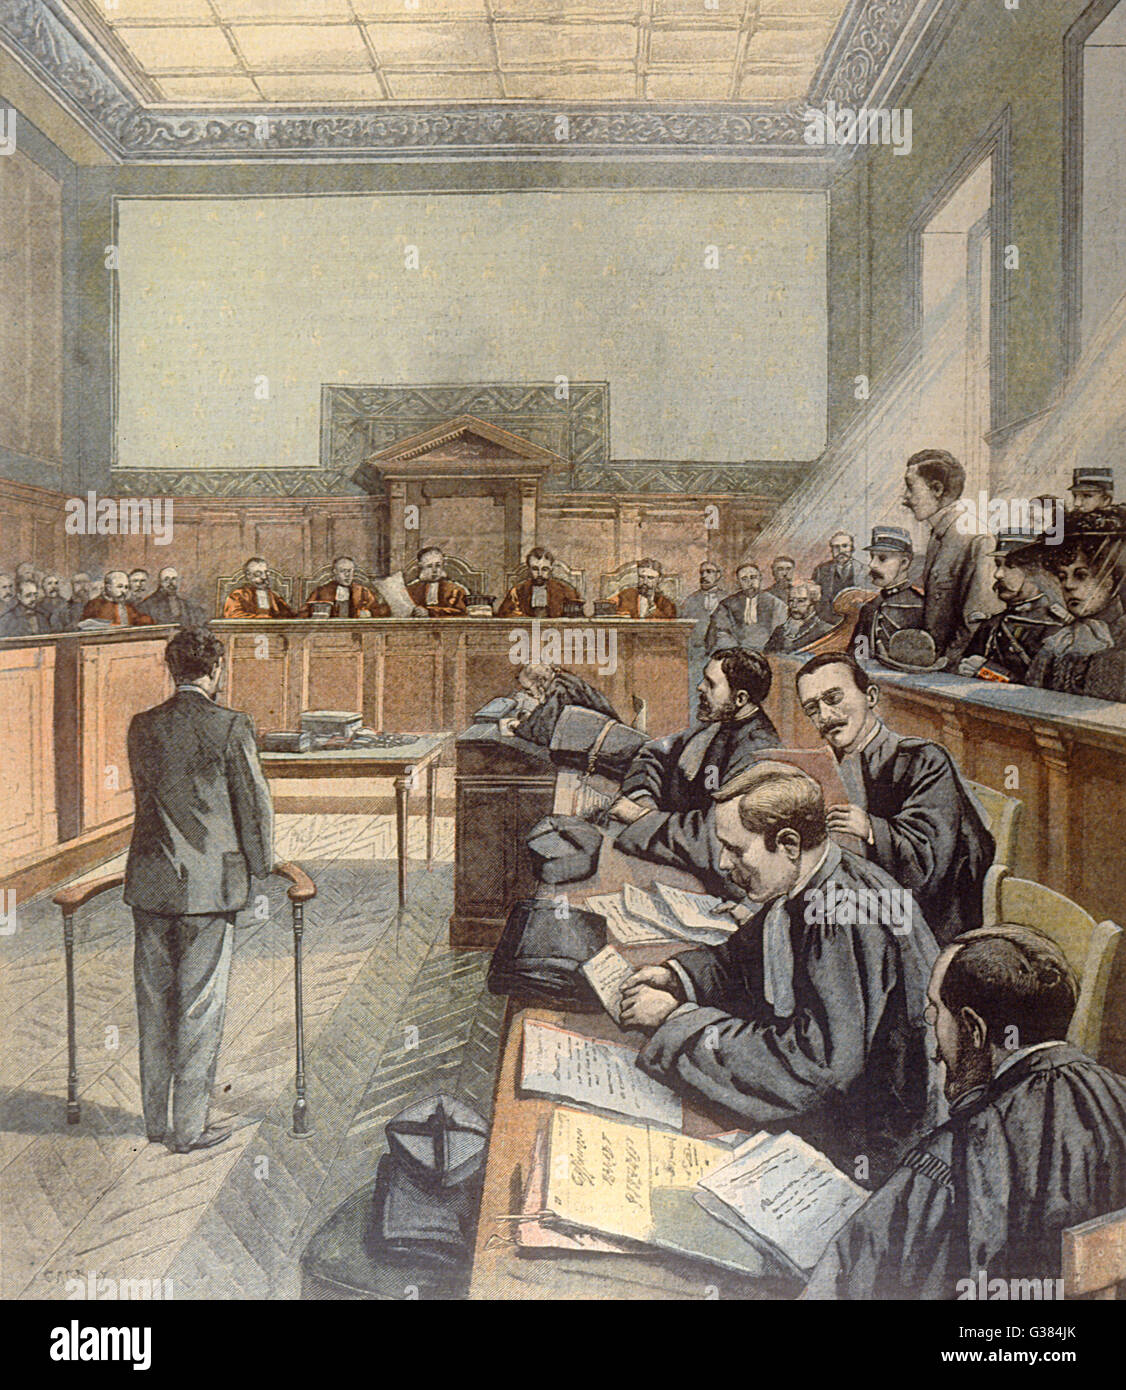 A FRENCH MURDER TRIAL At Chambery, Victorine Giriat  and Henri Bassot are tried for  the murder of Eugene Fougere  at Aix-les-Bains, killed for  her jewels     Date: June 1904 Stock Photo